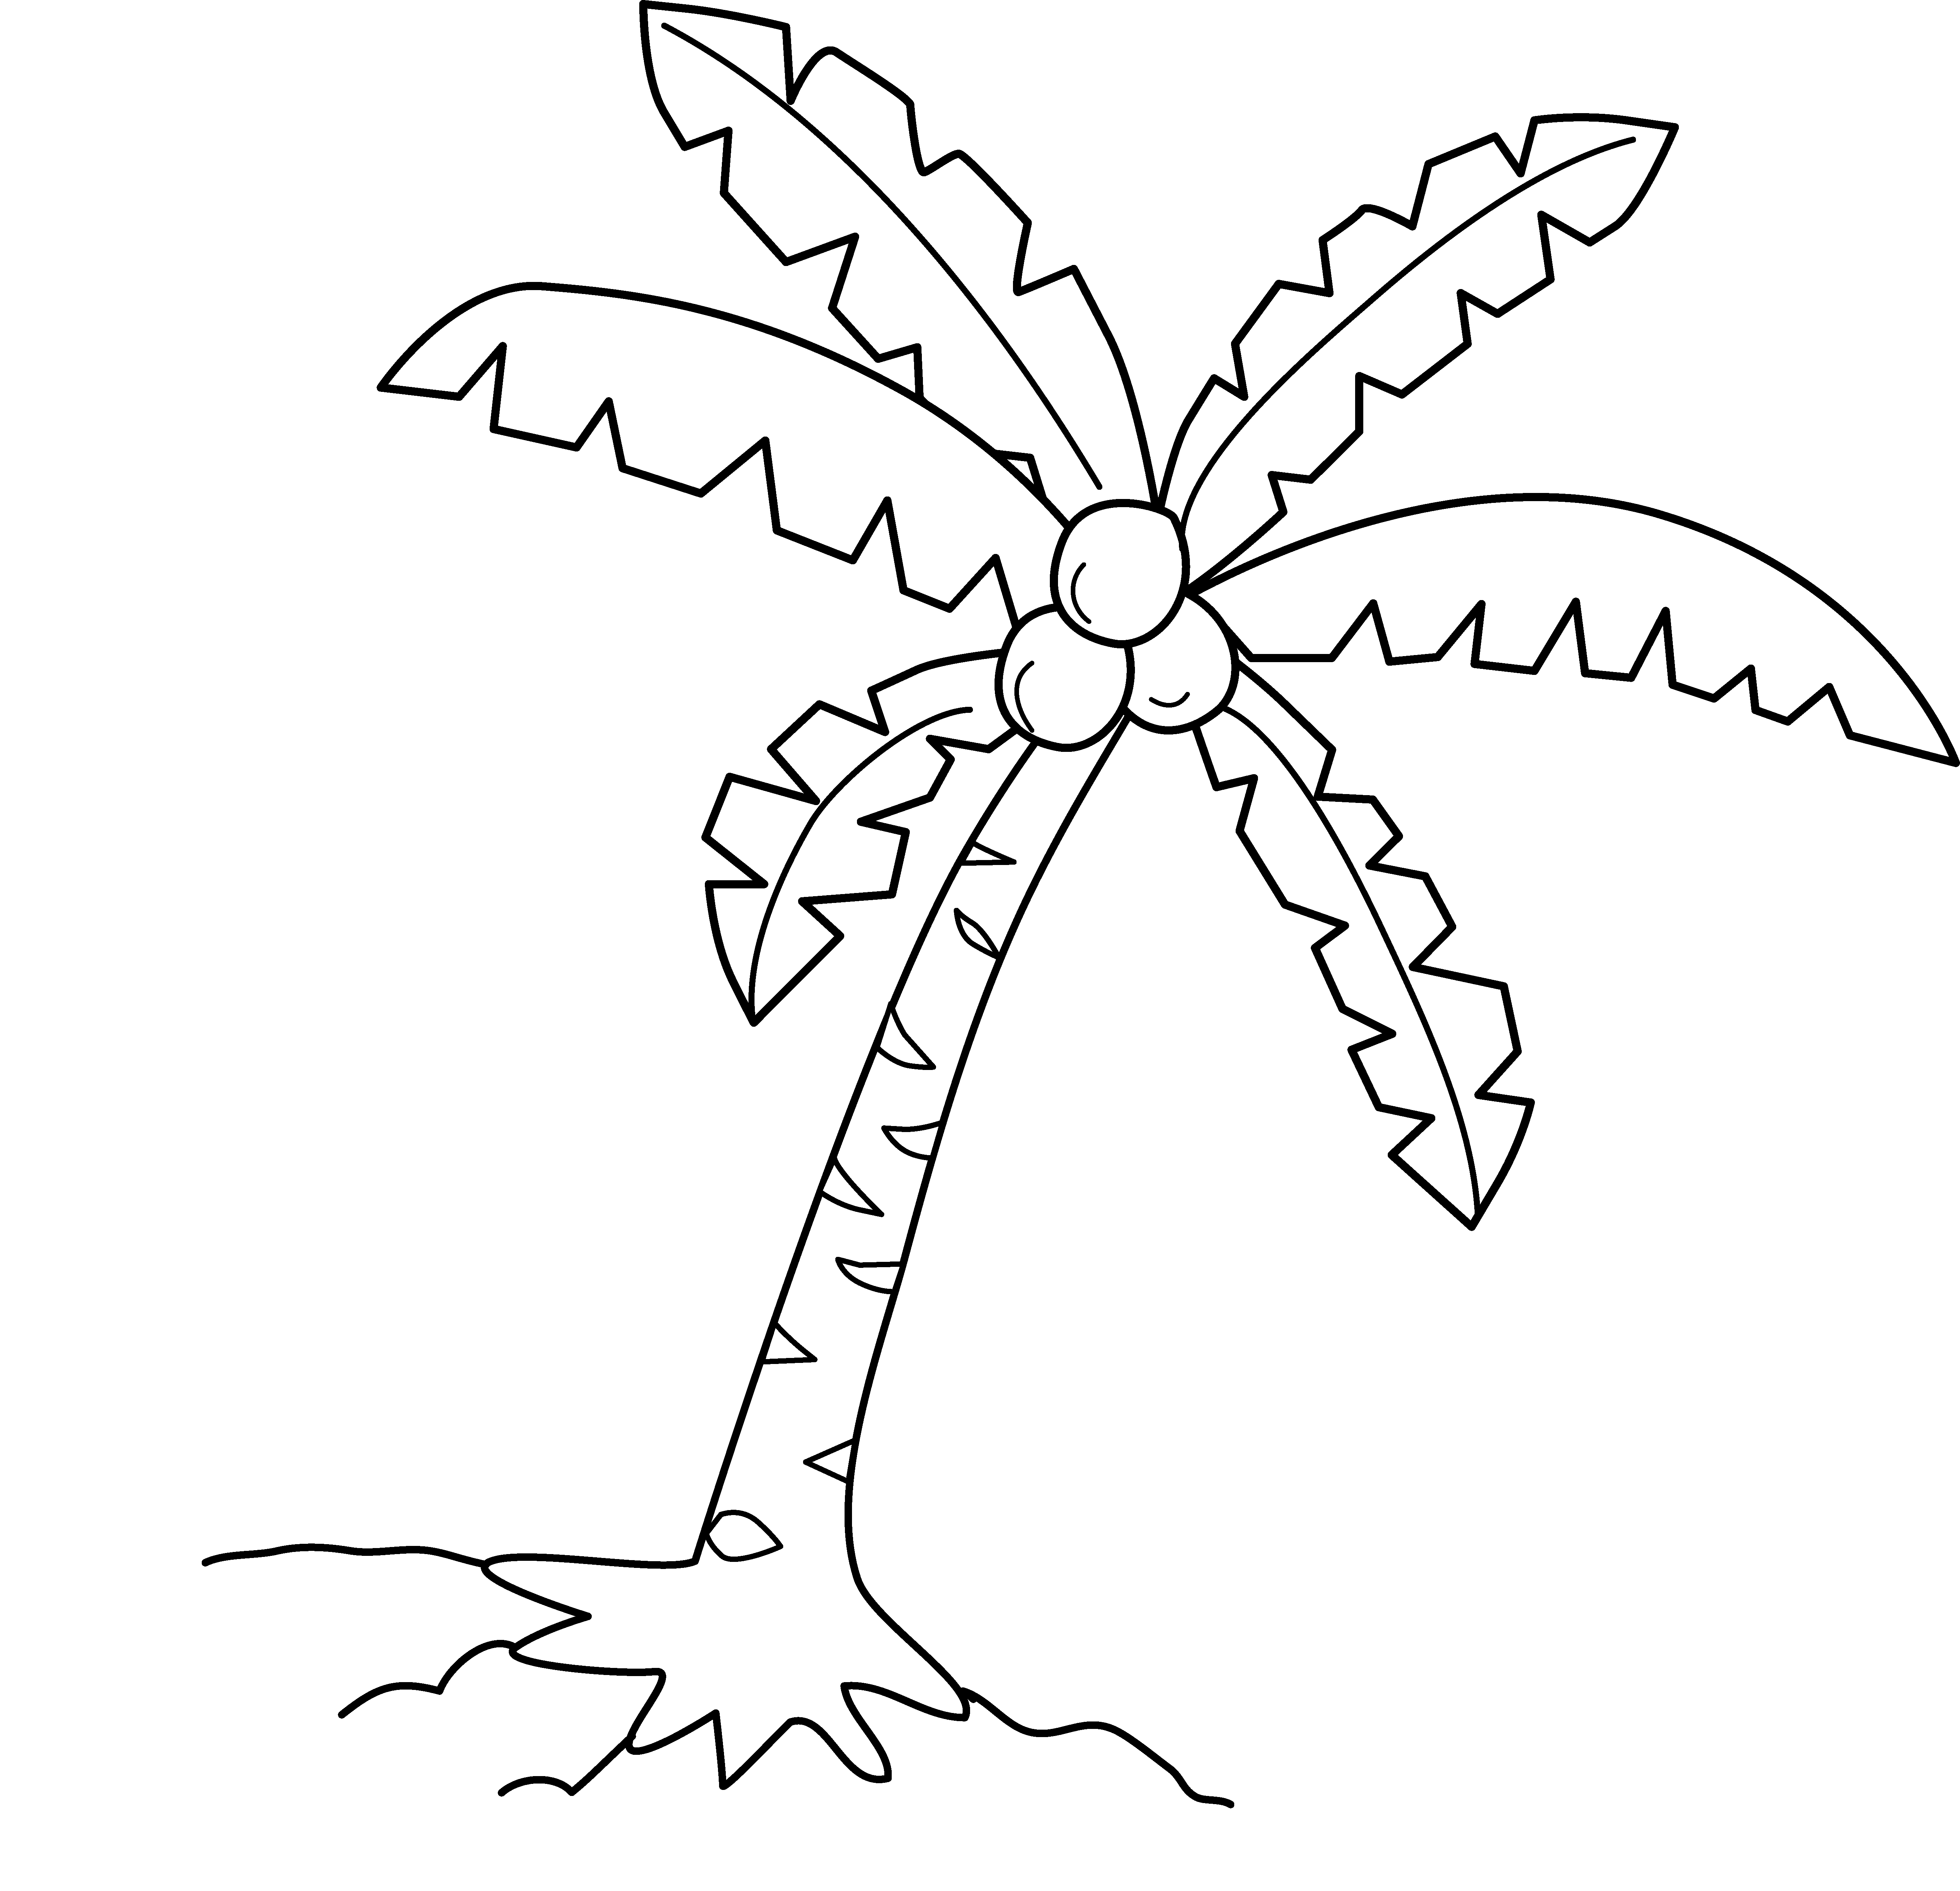 Drawing Tutorial : My Drawing of a Coconut Tree — Steemit